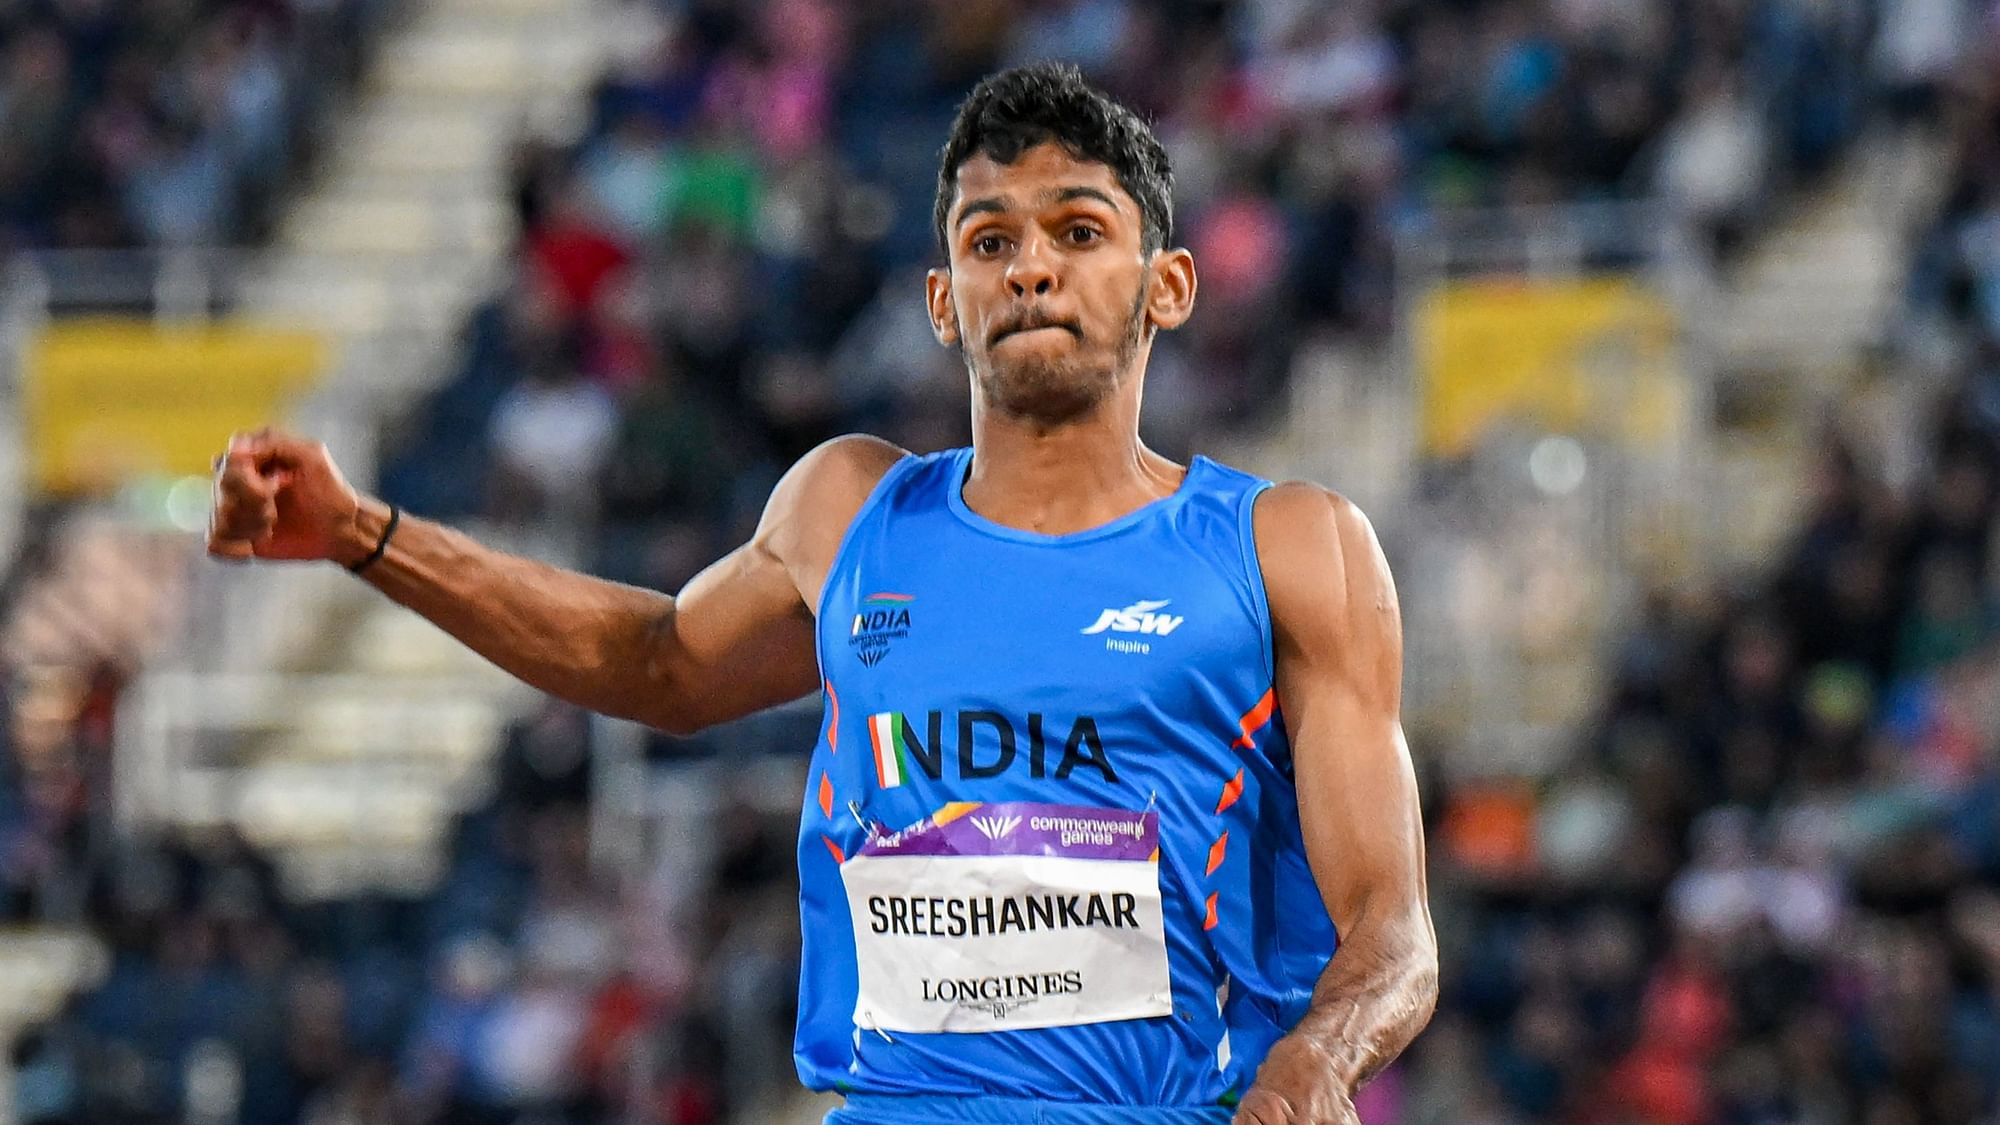 Commonwealth Games 2022, Day 7 Live Score and Result Updates Murali Sreeshankar Wins Historic Long Jump Silver